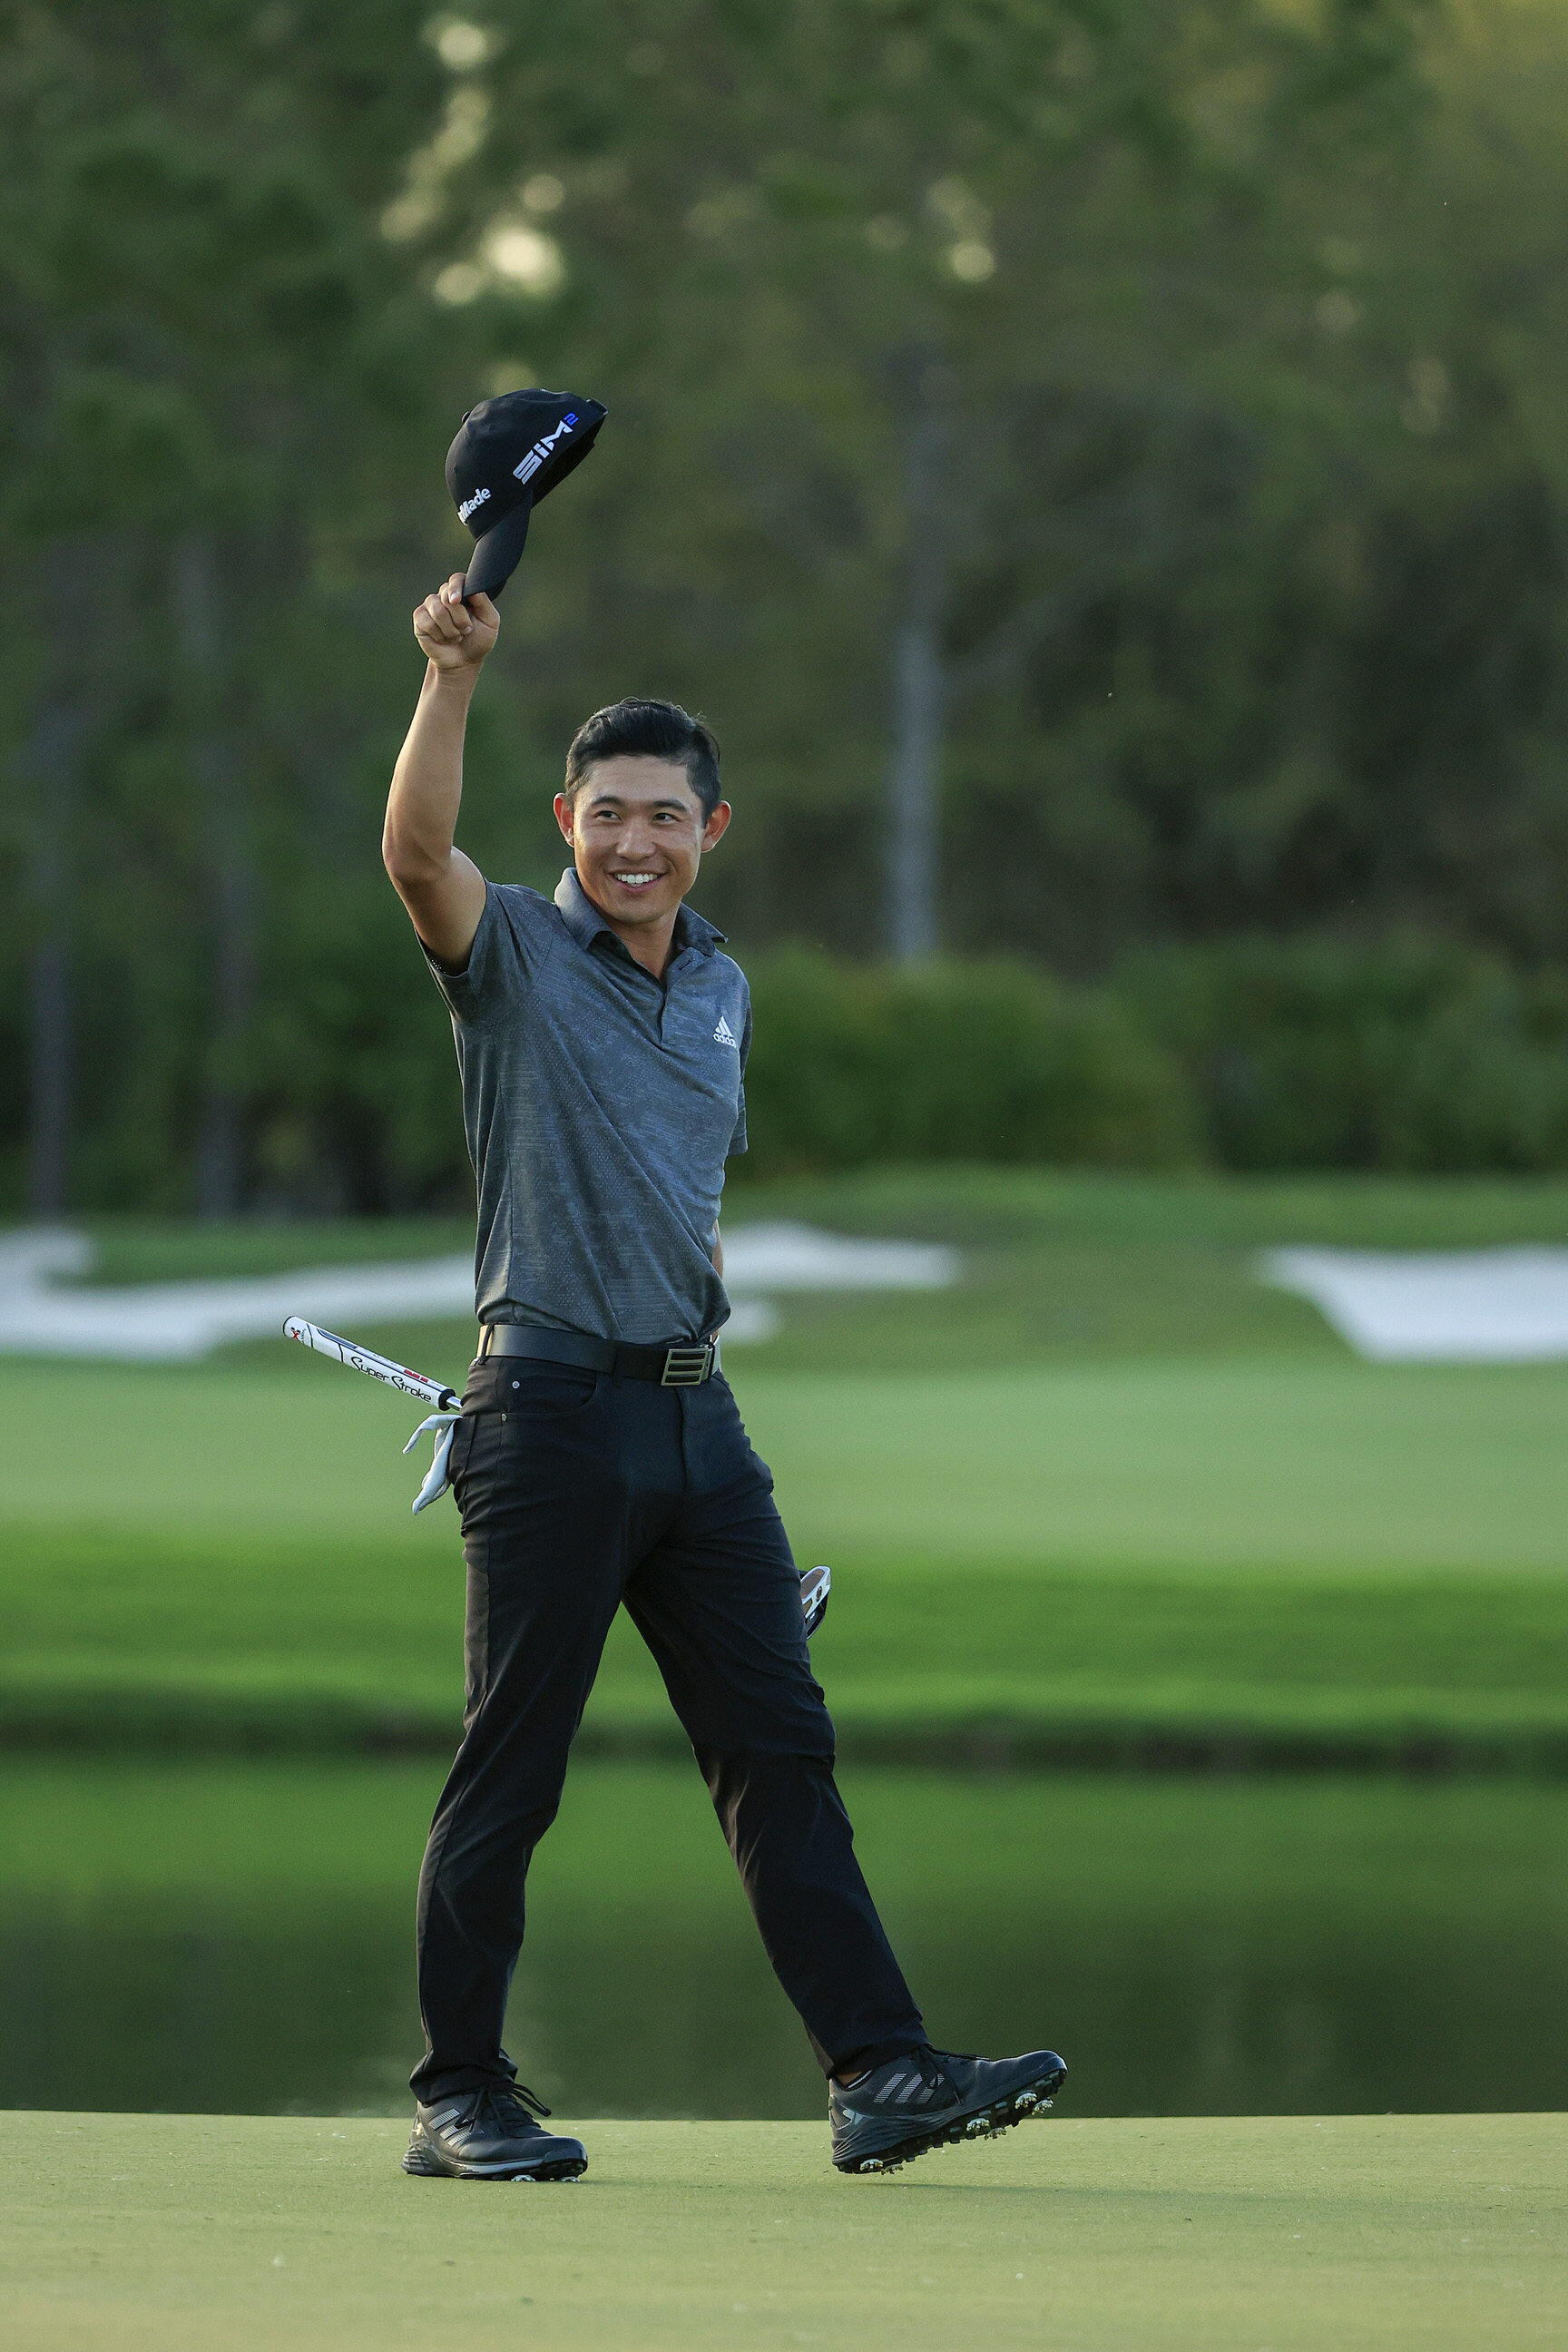  BRADENTON, FLORIDA - FEBRUARY 28: Collin Morikawa of the United States celebrates winning on the 18th green during the final round of World Golf Championships-Workday Championship at The Concession on February 28, 2021 in Bradenton, Florida. (Photo 